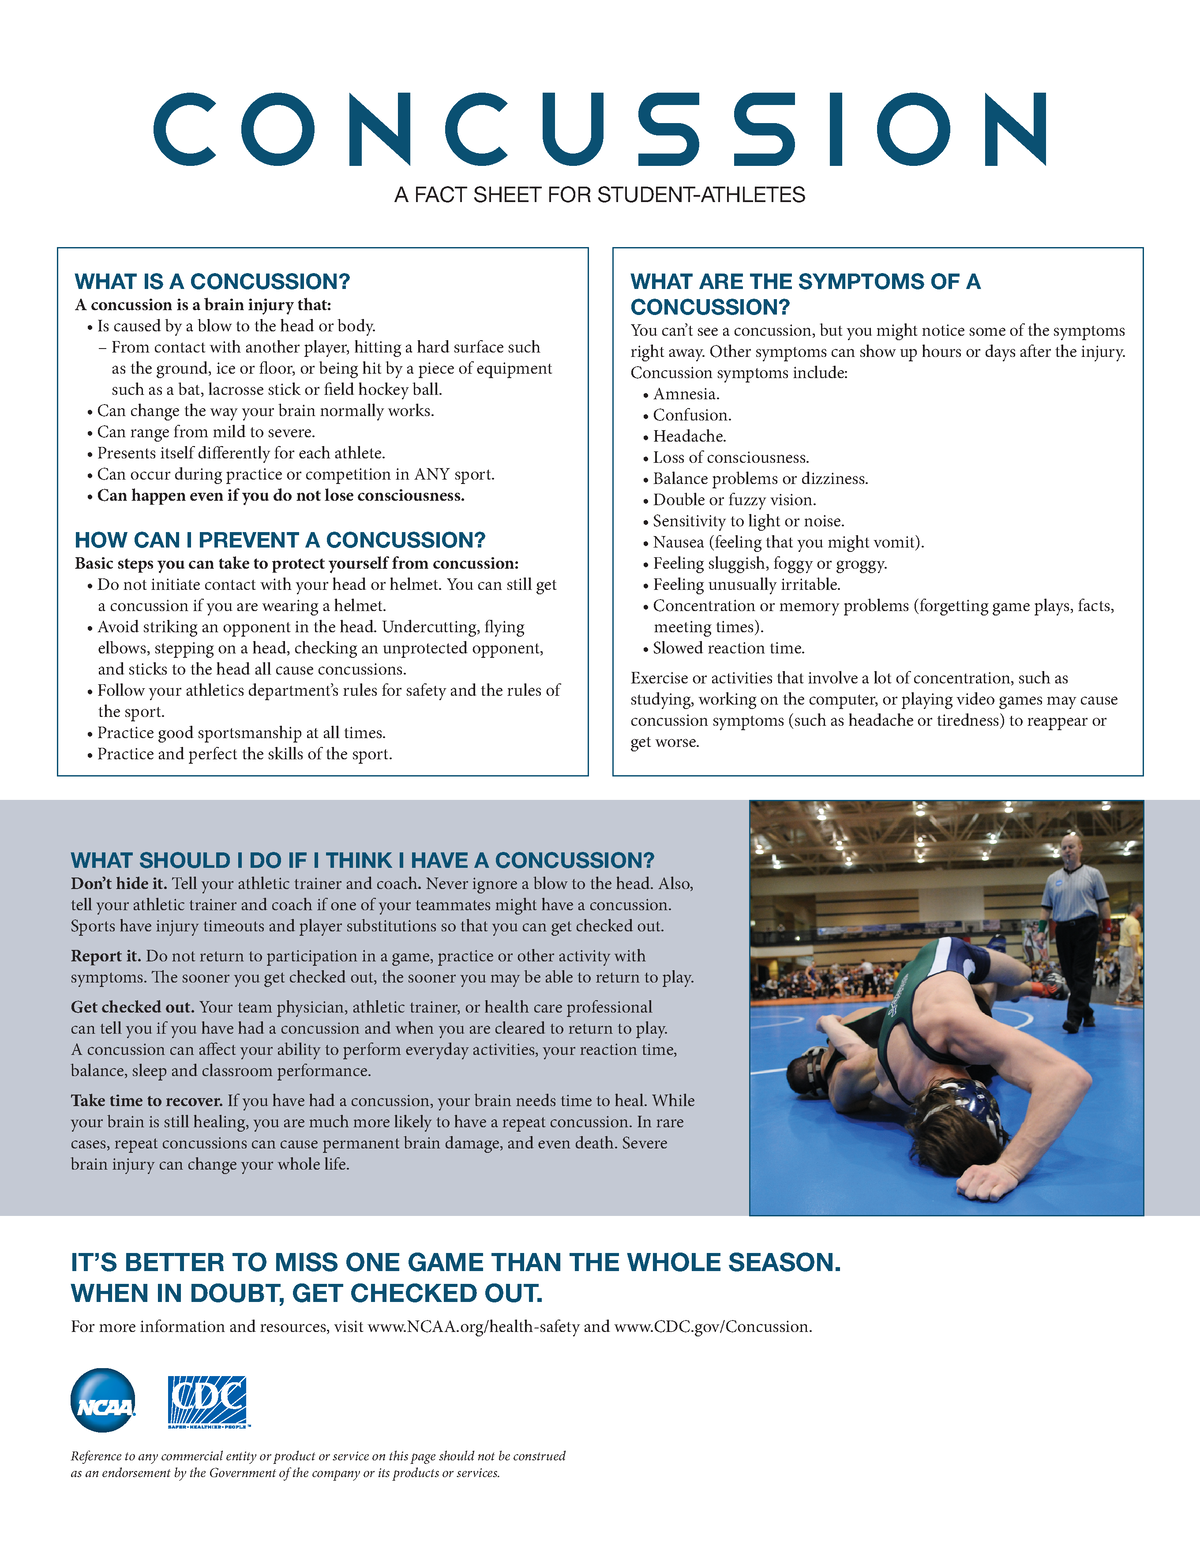 Concussion Fact Sheet CONCUSSION A FACT SHEET FOR STUDENTATHLETES